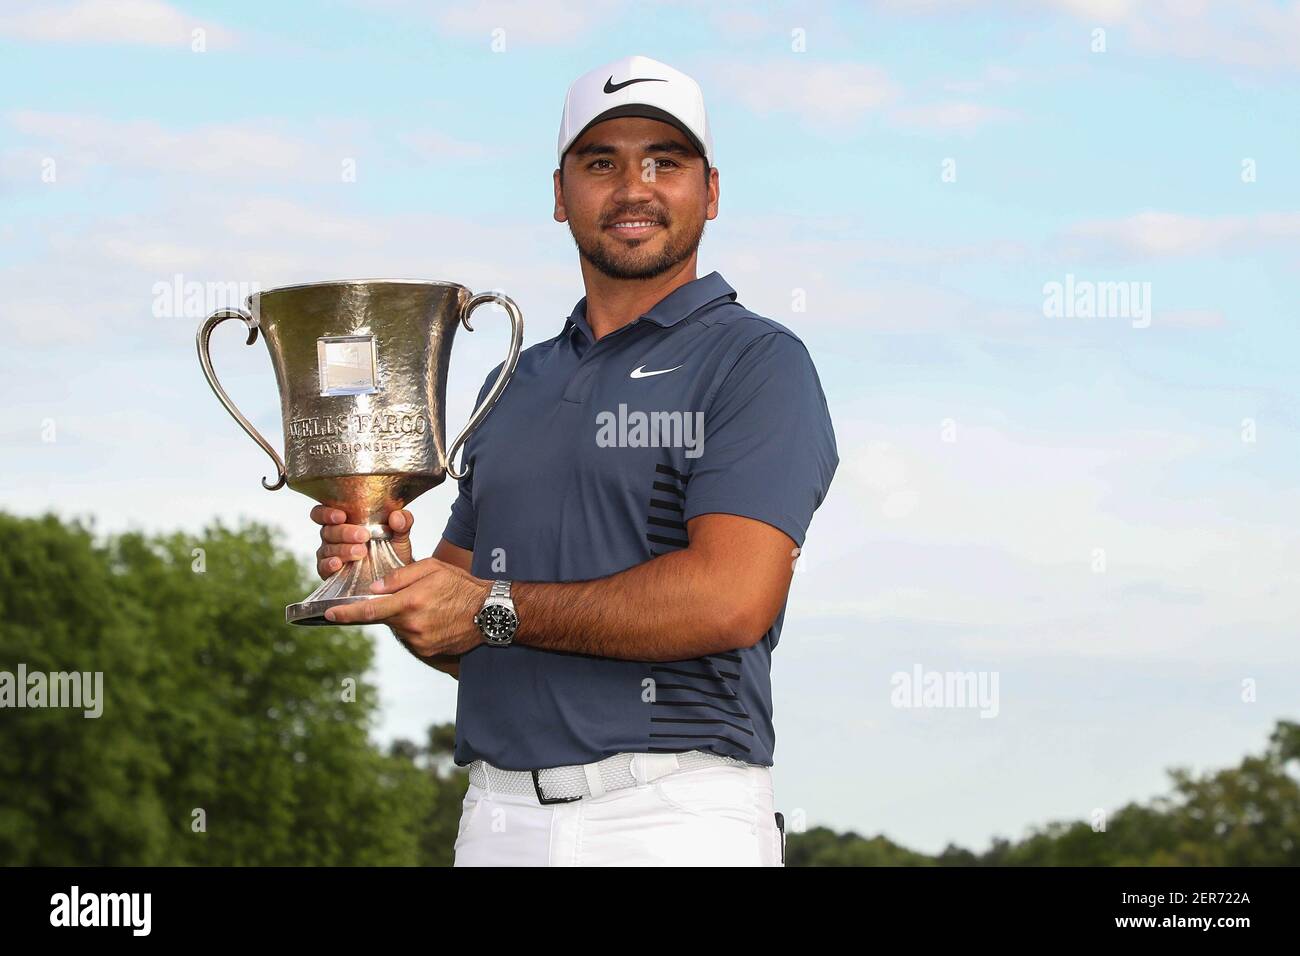 May 6, 2018; Charlotte, NC, USA; Jason Day with the winning trophy during the final round of the Wells Fargo Championship golf tournament at Quail Hollow Club. Mandatory Credit: Jim Dedmon-USA TODAY Sports Stock Photo